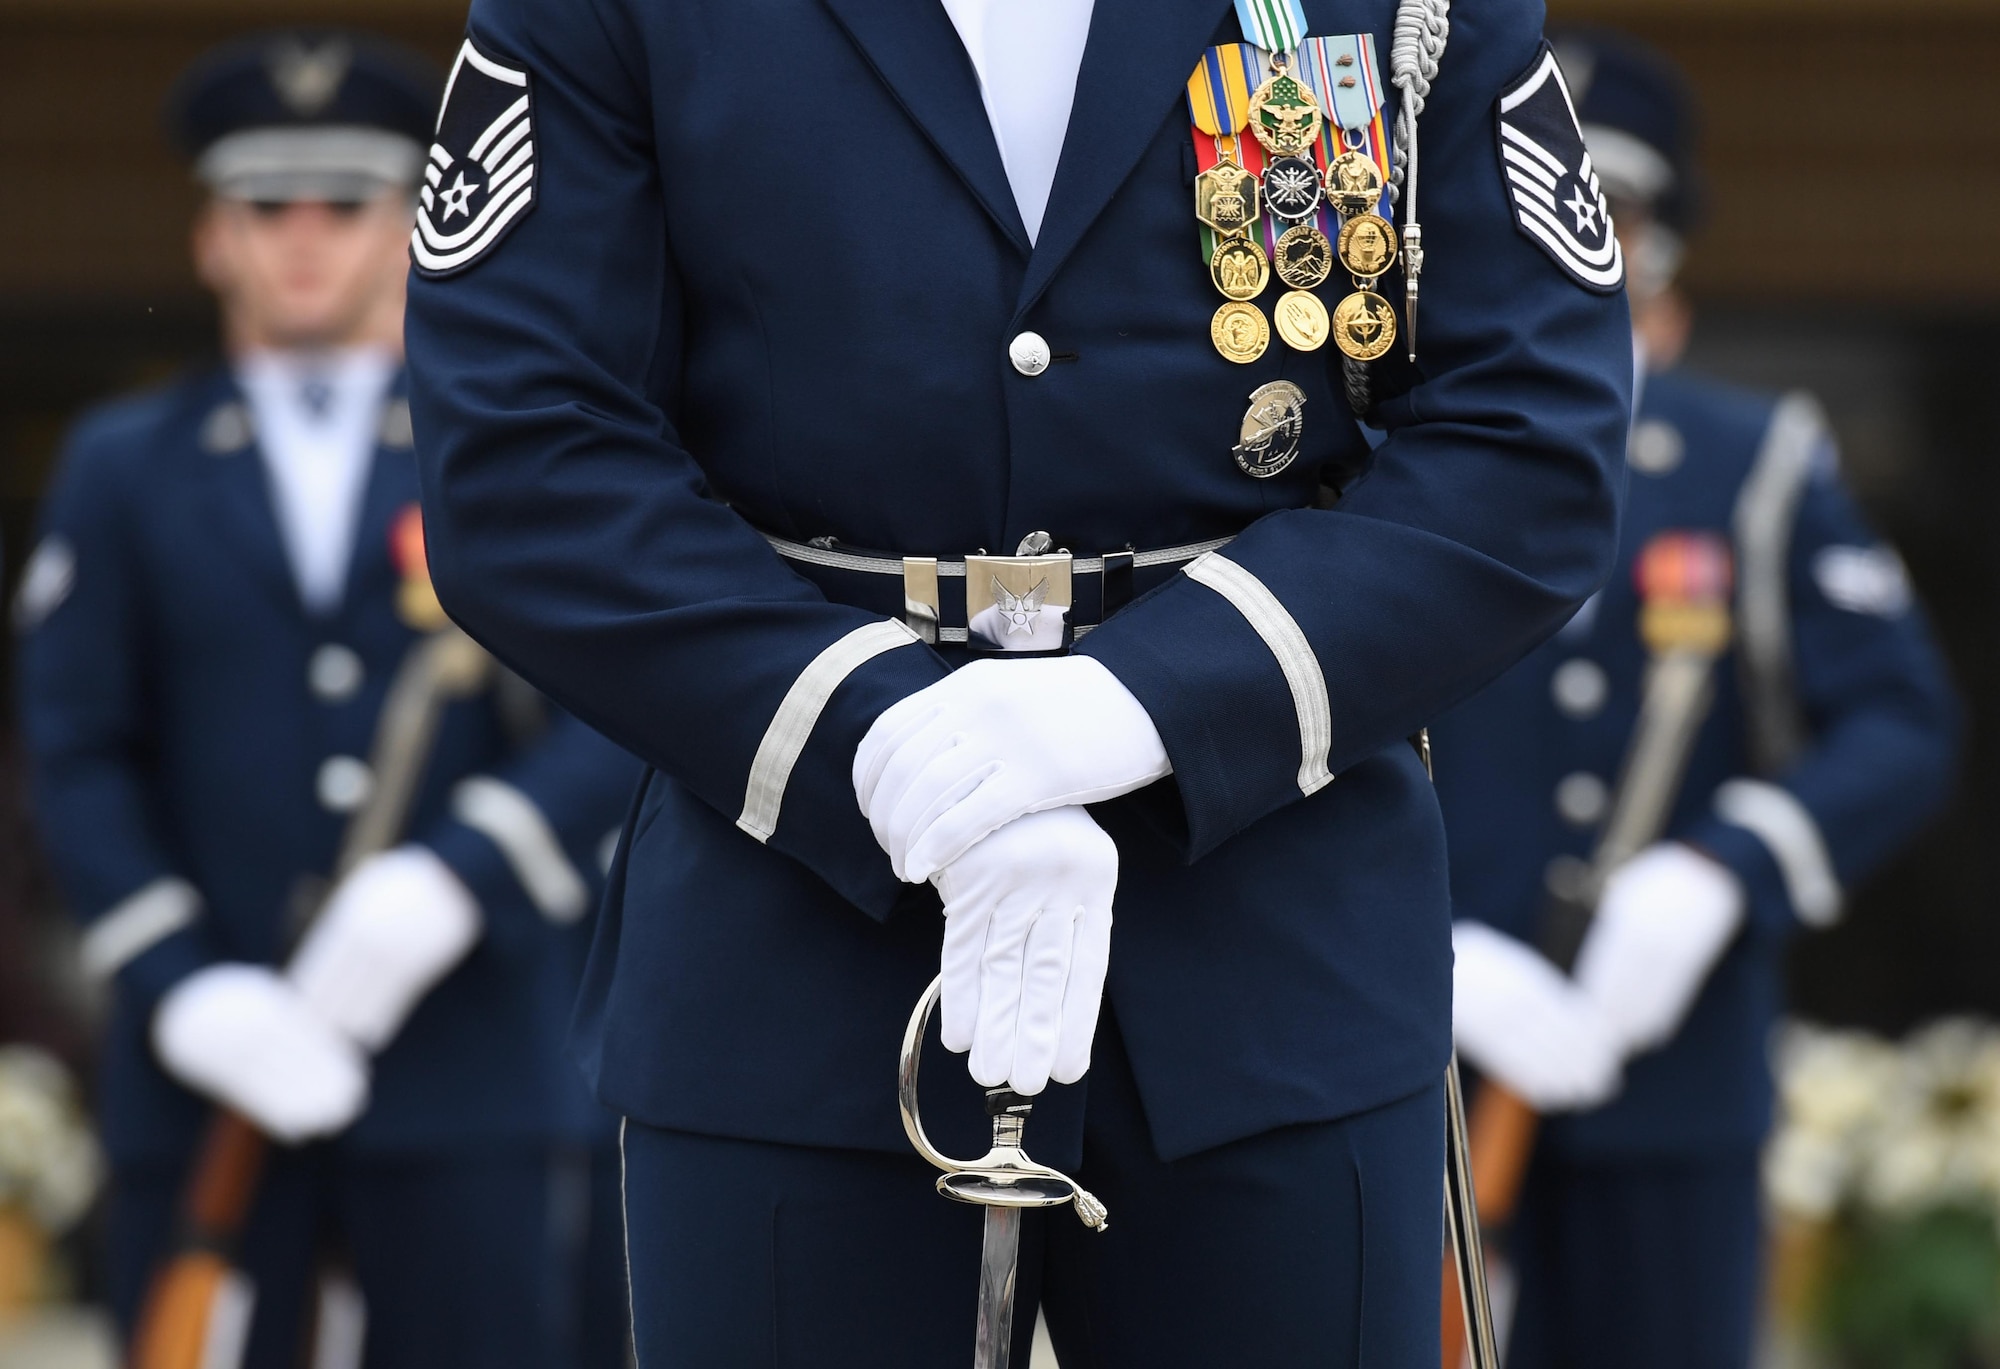 U.S. Air Force Master Sgt. Jason Prophet, U.S. Air Force Honor Guard Drill Team superintendent, participates in the debut performance of the team's 2019 routine in front of Keesler leadership and 81st Training Group Airmen on the Levitow Training Support Facility drill pad at Keesler Air Force Base, Mississippi, Feb. 8, 2019. The team comes to Keesler every year for five weeks to develop a new routine that they will use throughout the year. (U.S. Air Force photo by Kemberly Groue)